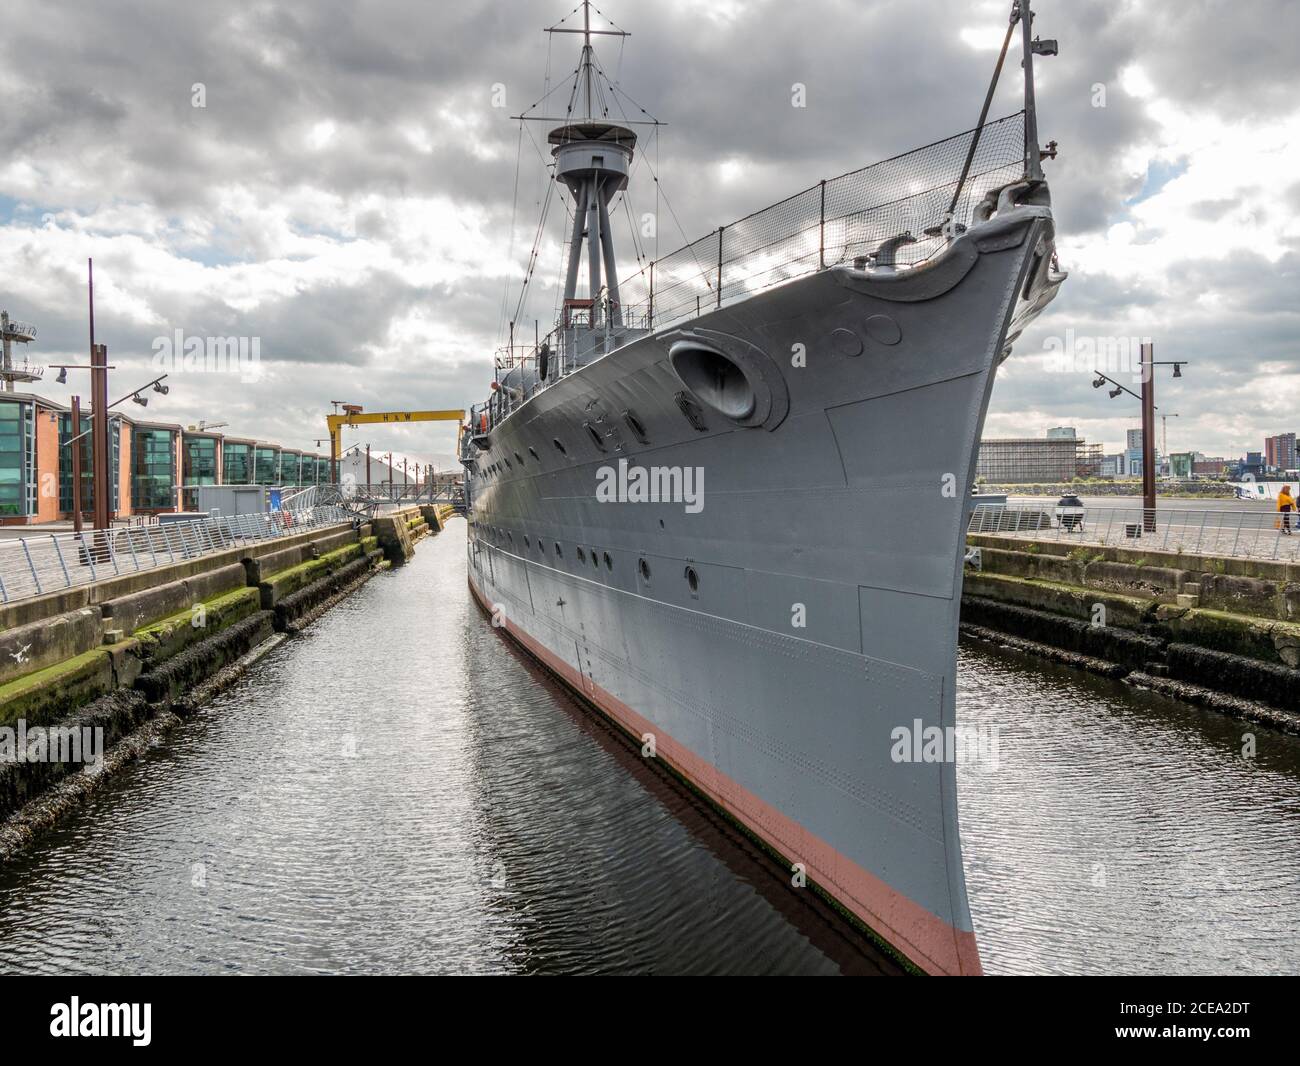 Belfast, Northern Ireland, UK, 31 August 2020: HMS Caroline a restored First World War cruiser on display in Alexandra Dock may be taken to Portsmouth for her own protection. The future of the attraction is in doubt as she is closed to the public because of the Coronavirus pandemic and necessary maintenance is being delayed. It is believed that should the ship remain closed the National Museum of the Royal Navy may decide she should be taken to Portsmouth. HMS Caroline was commissioned in 1914 and saw action in the First World War. She was decommissioned in 2011. Stock Photo